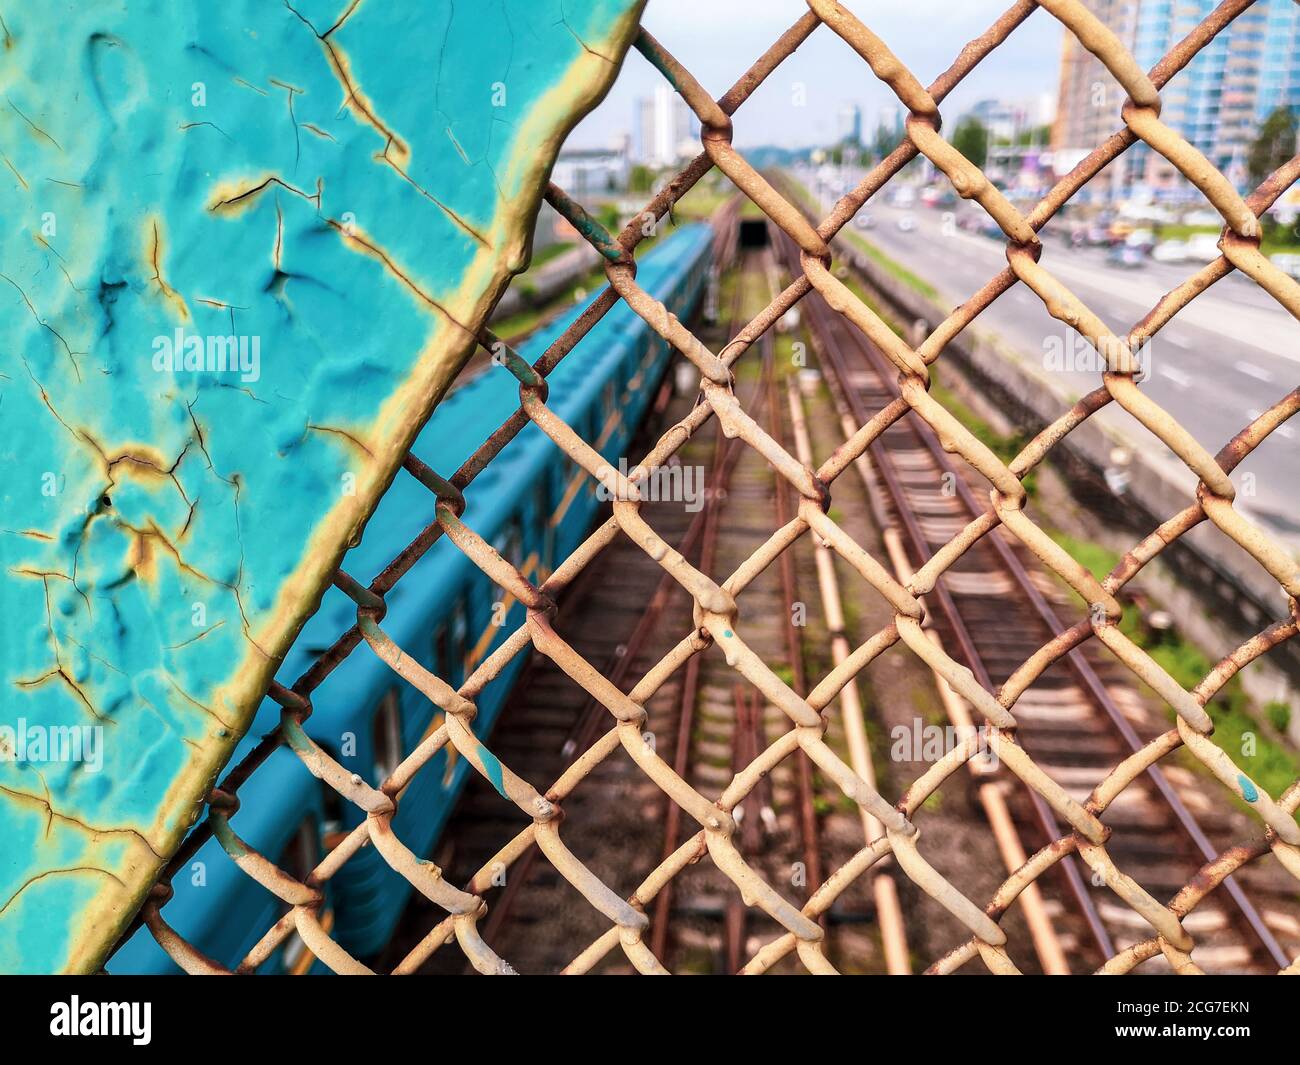 View through the old rusty painted cracked chainlink fence over the railway with blue tube train. Urban cityscape from the bridge. Stock Photo